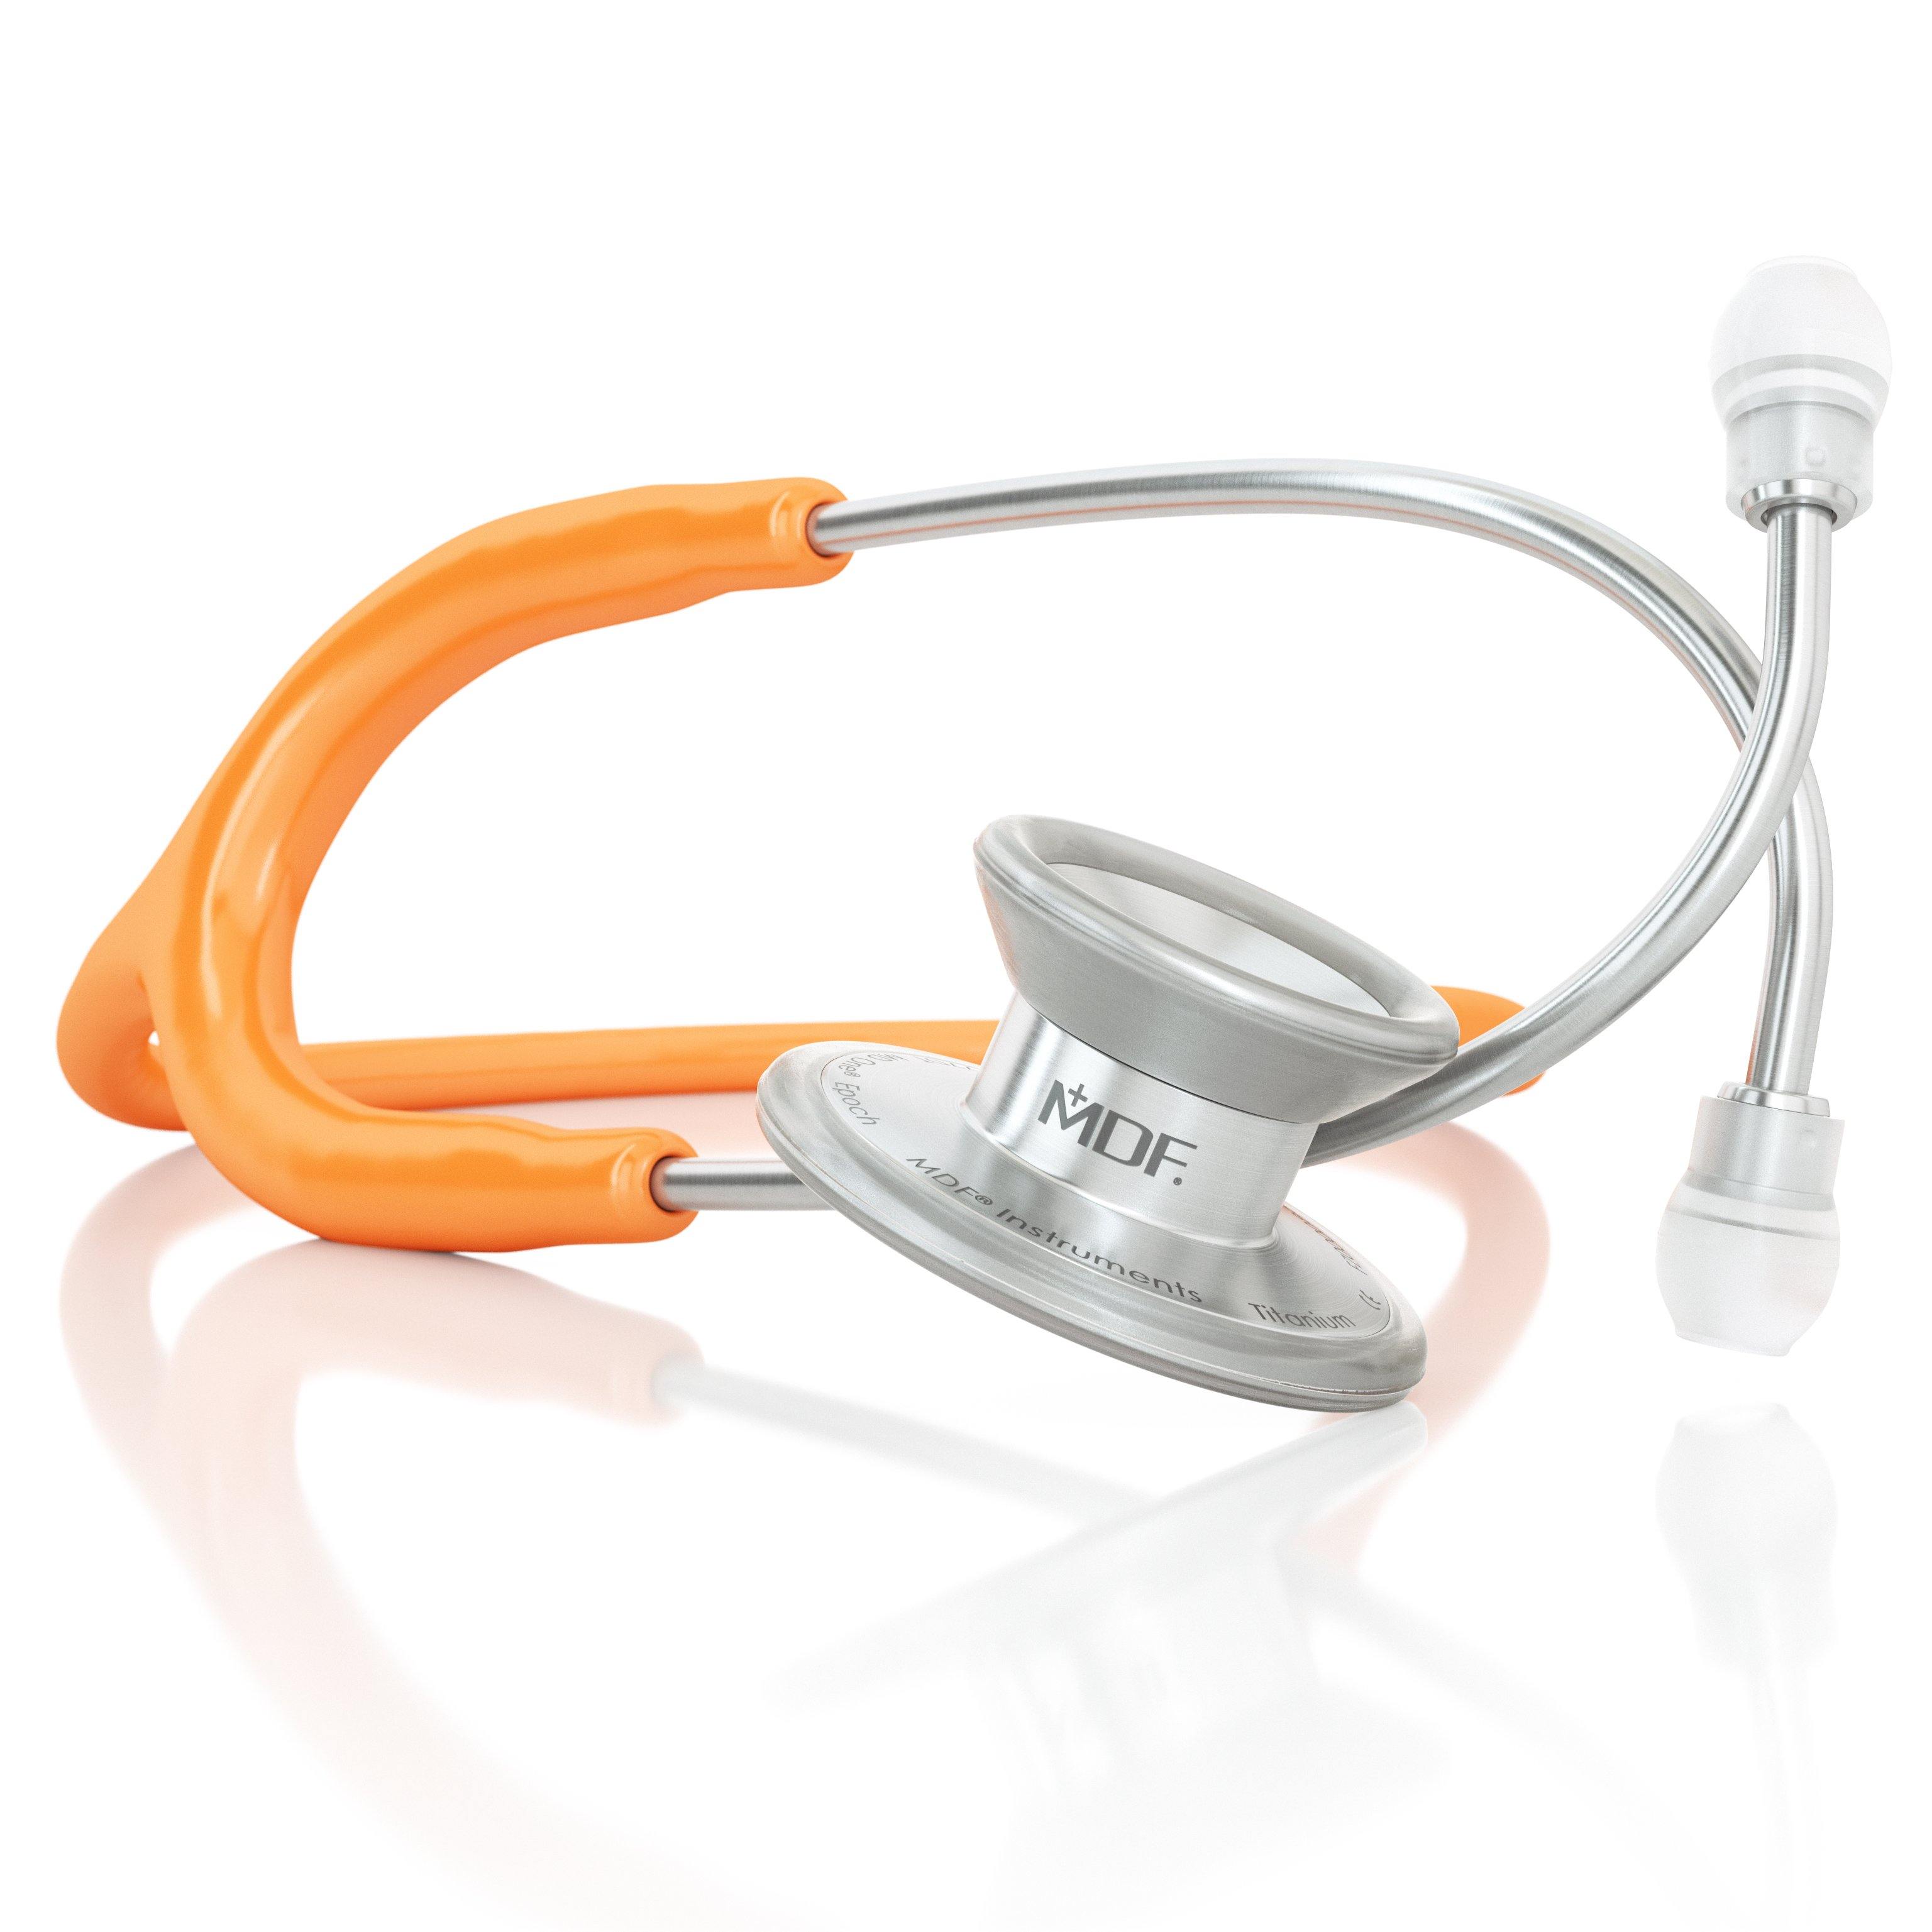 MDF® Instruments Stethoscope Reviews